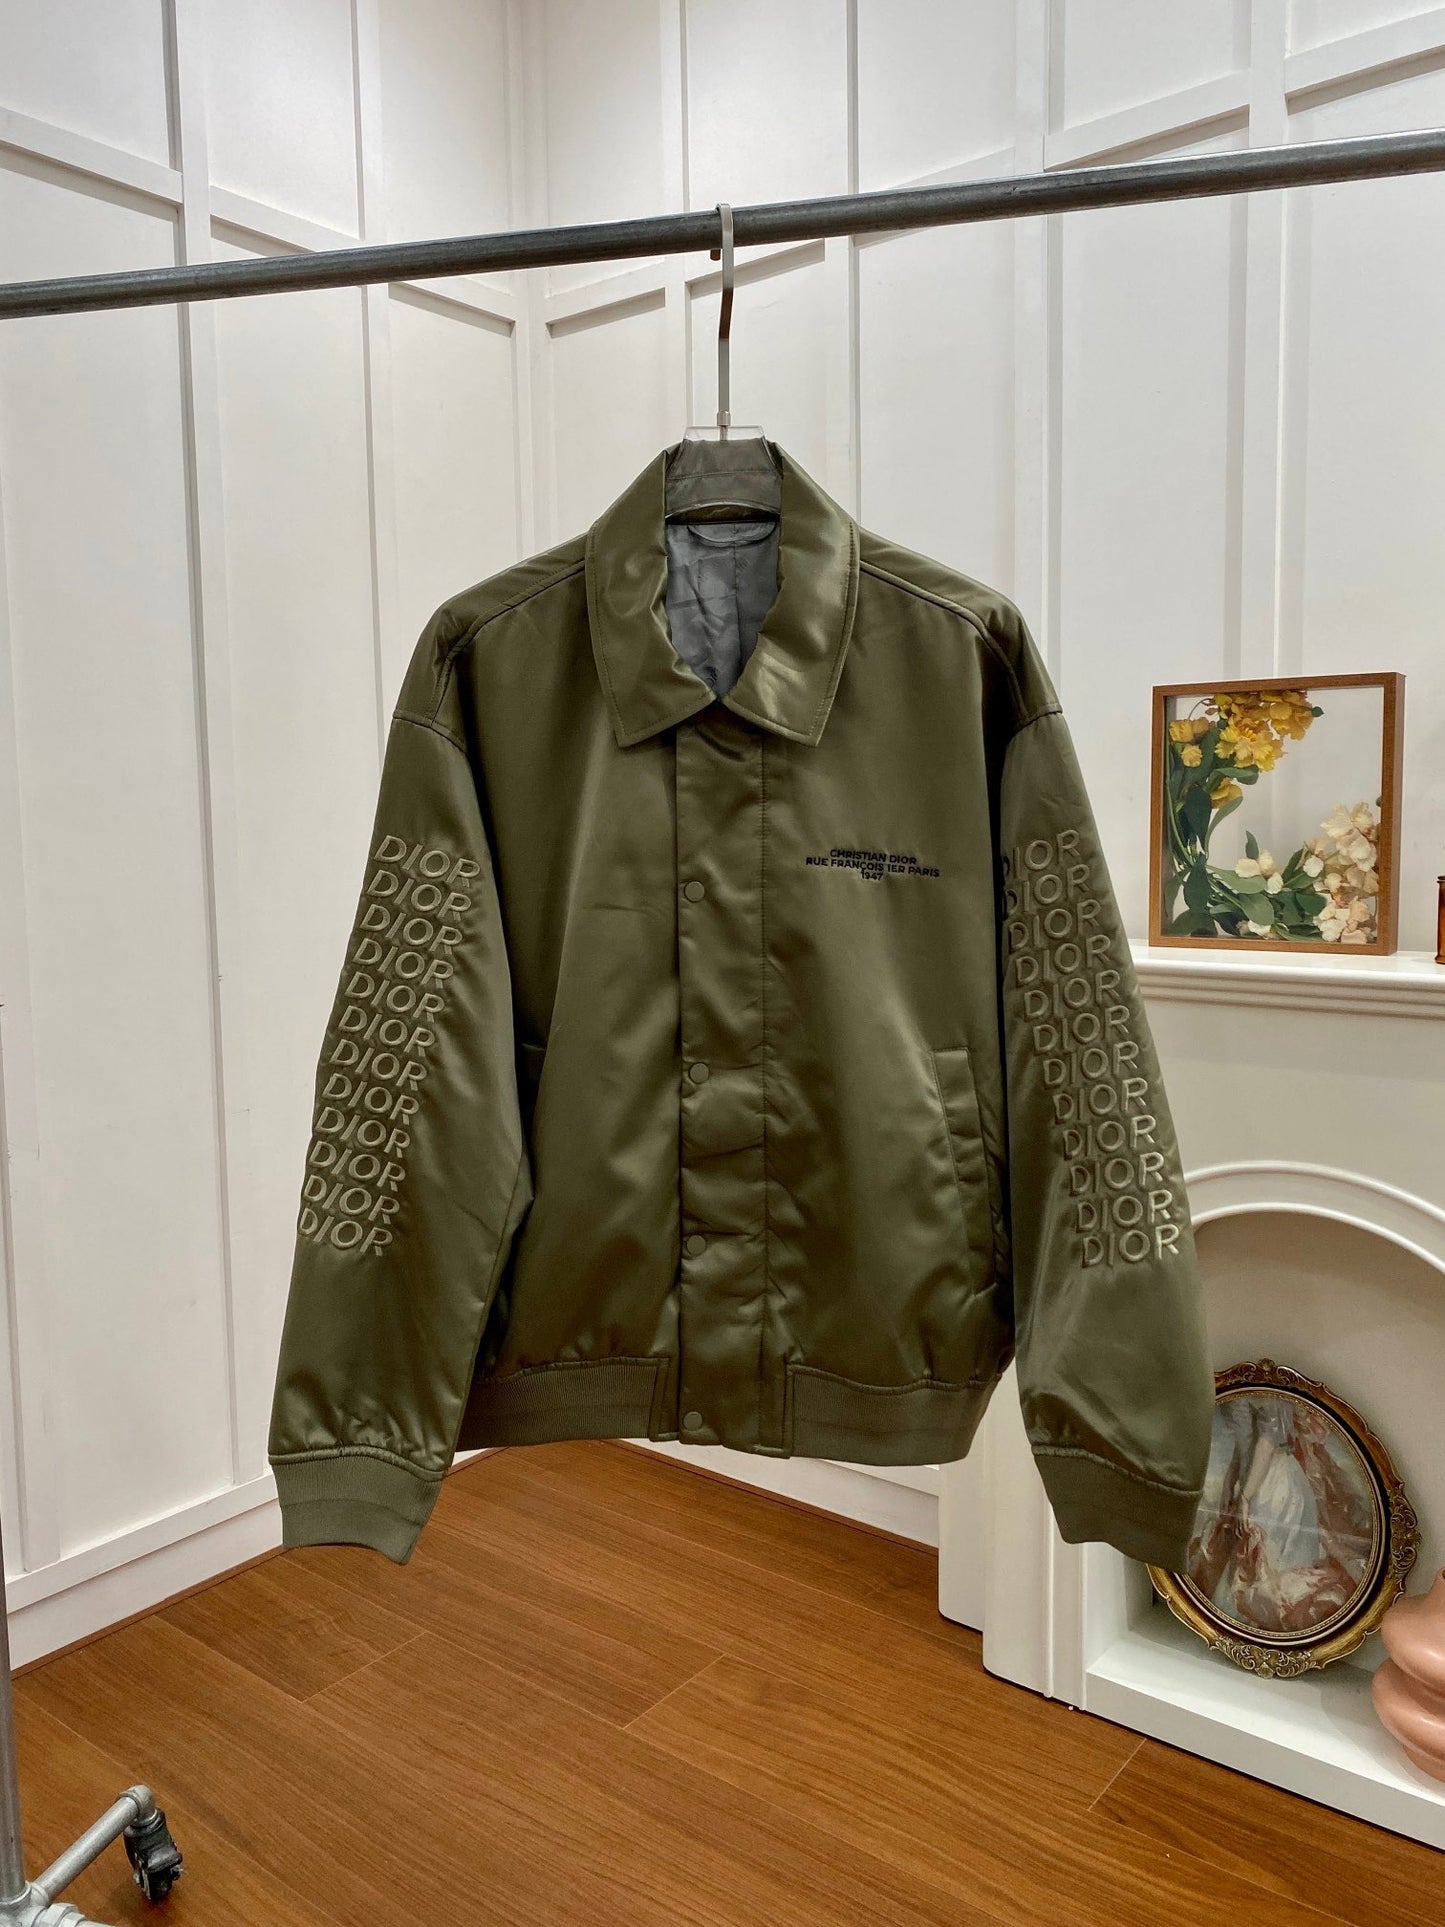 Black and Army green Jacket